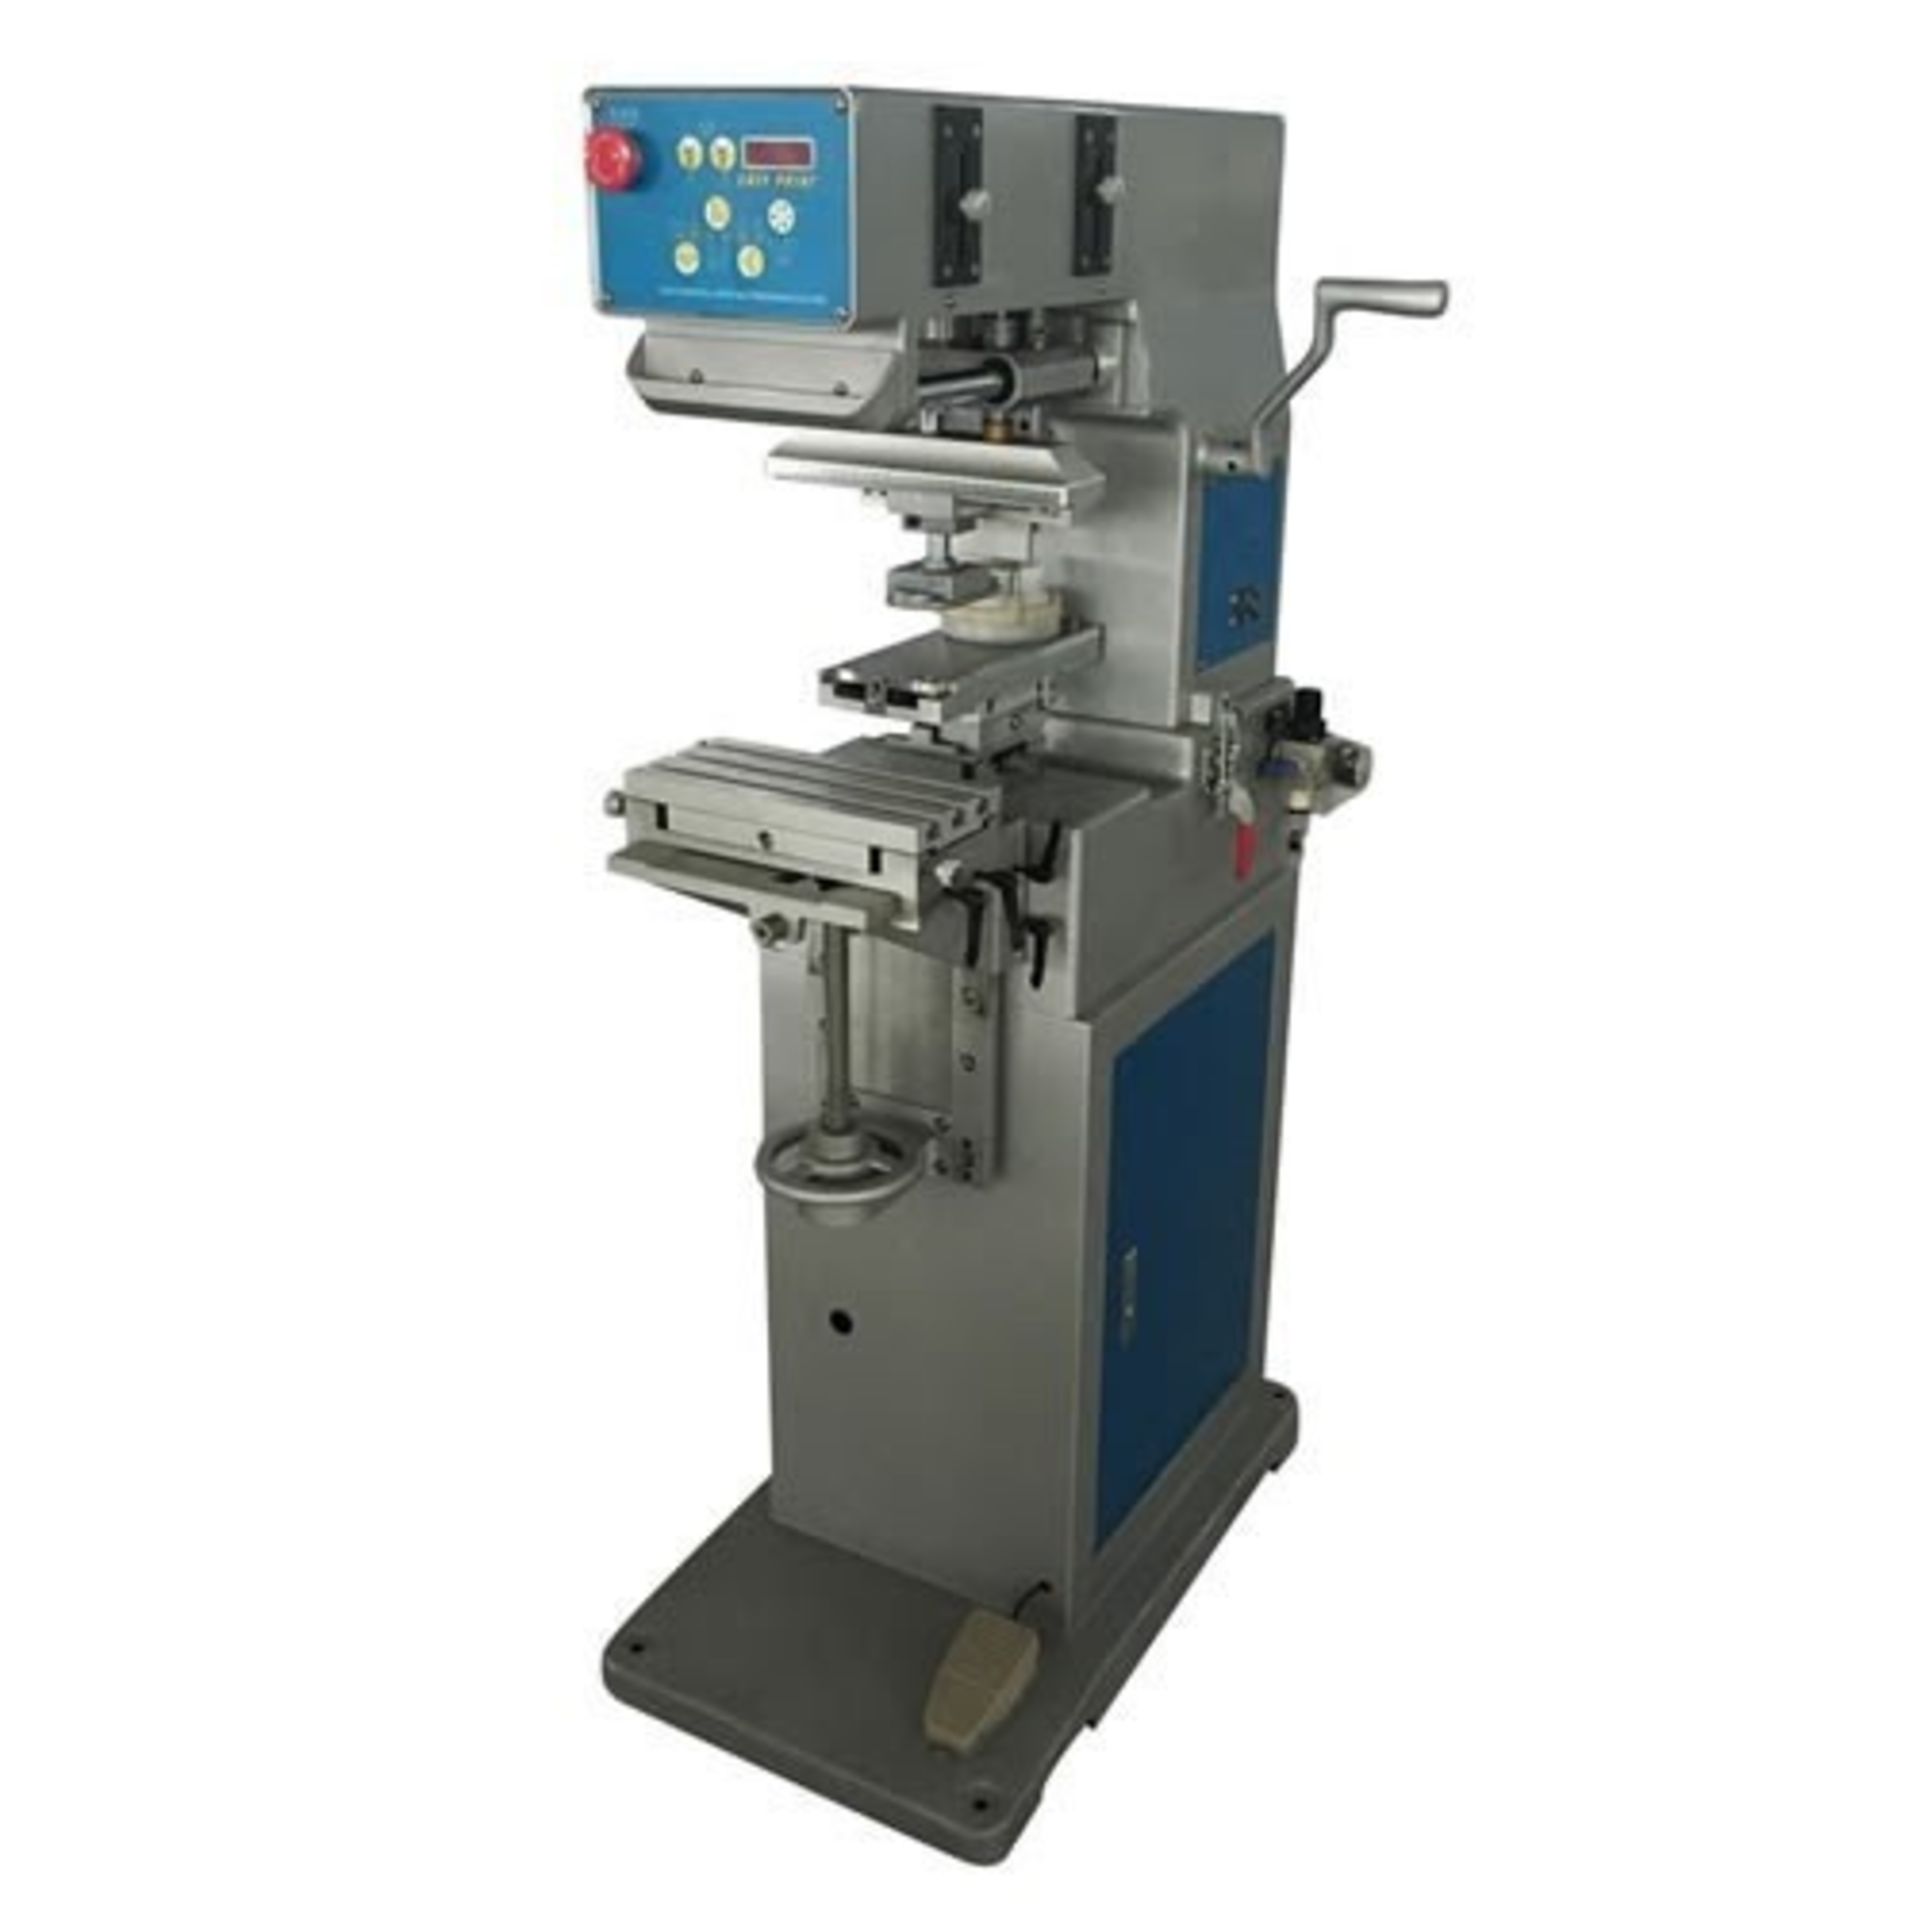 2-Color Tampo Screen Pad Printing Machine, Semi-Automatic for Promotion Items (Located 74 NW 176th